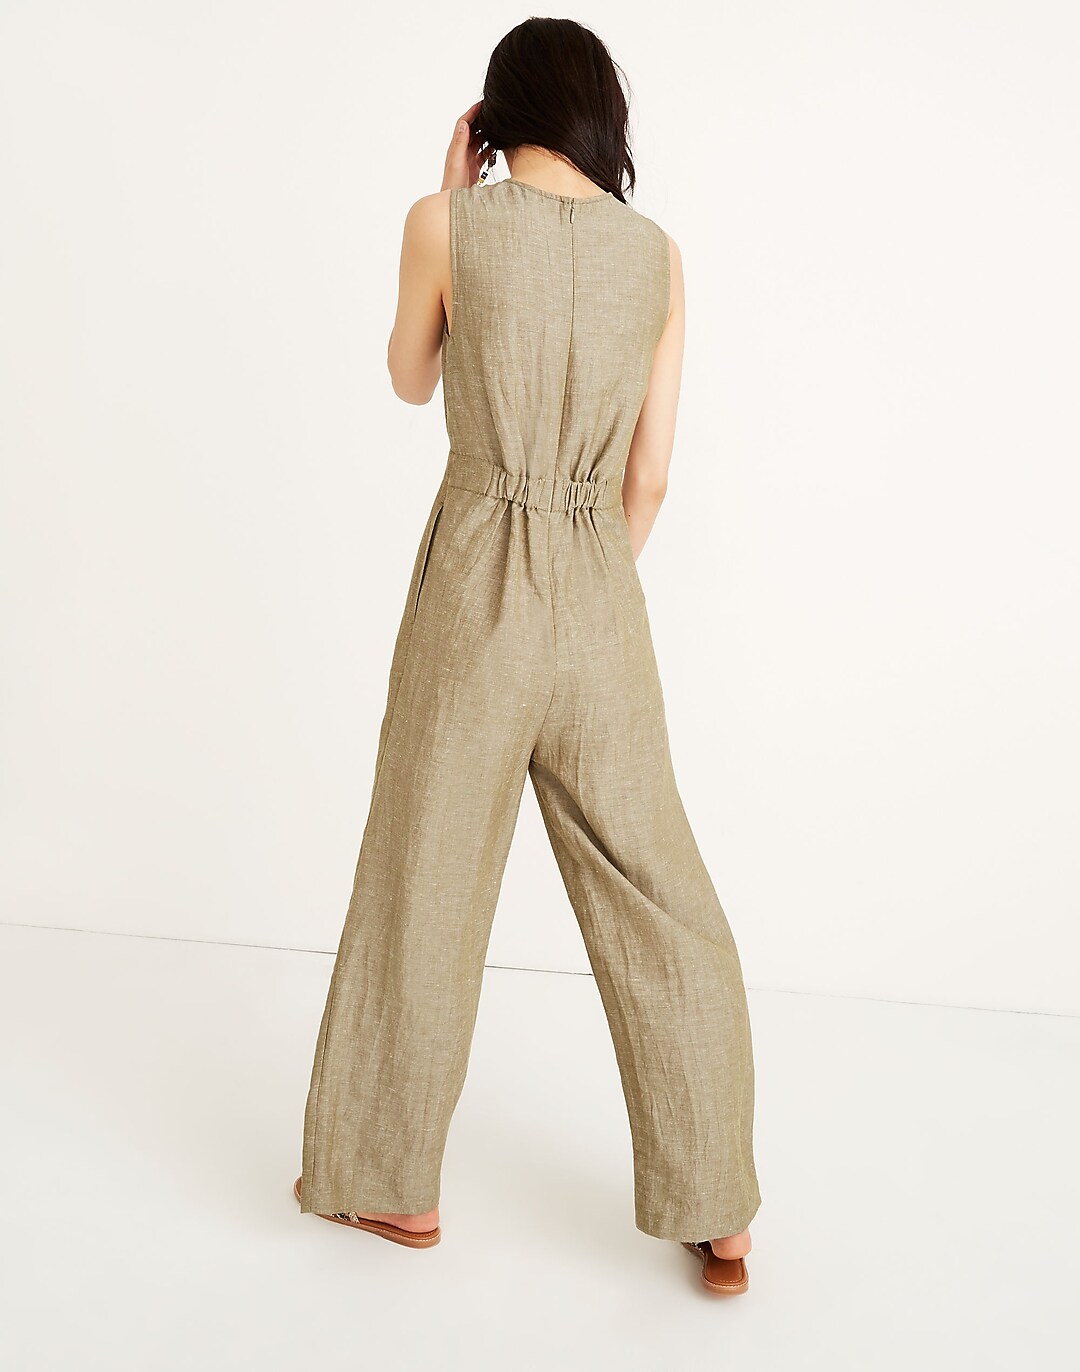 Women's Solid Ankle Length Linen Jumpsuit in 3 Colors Sizes 4-30